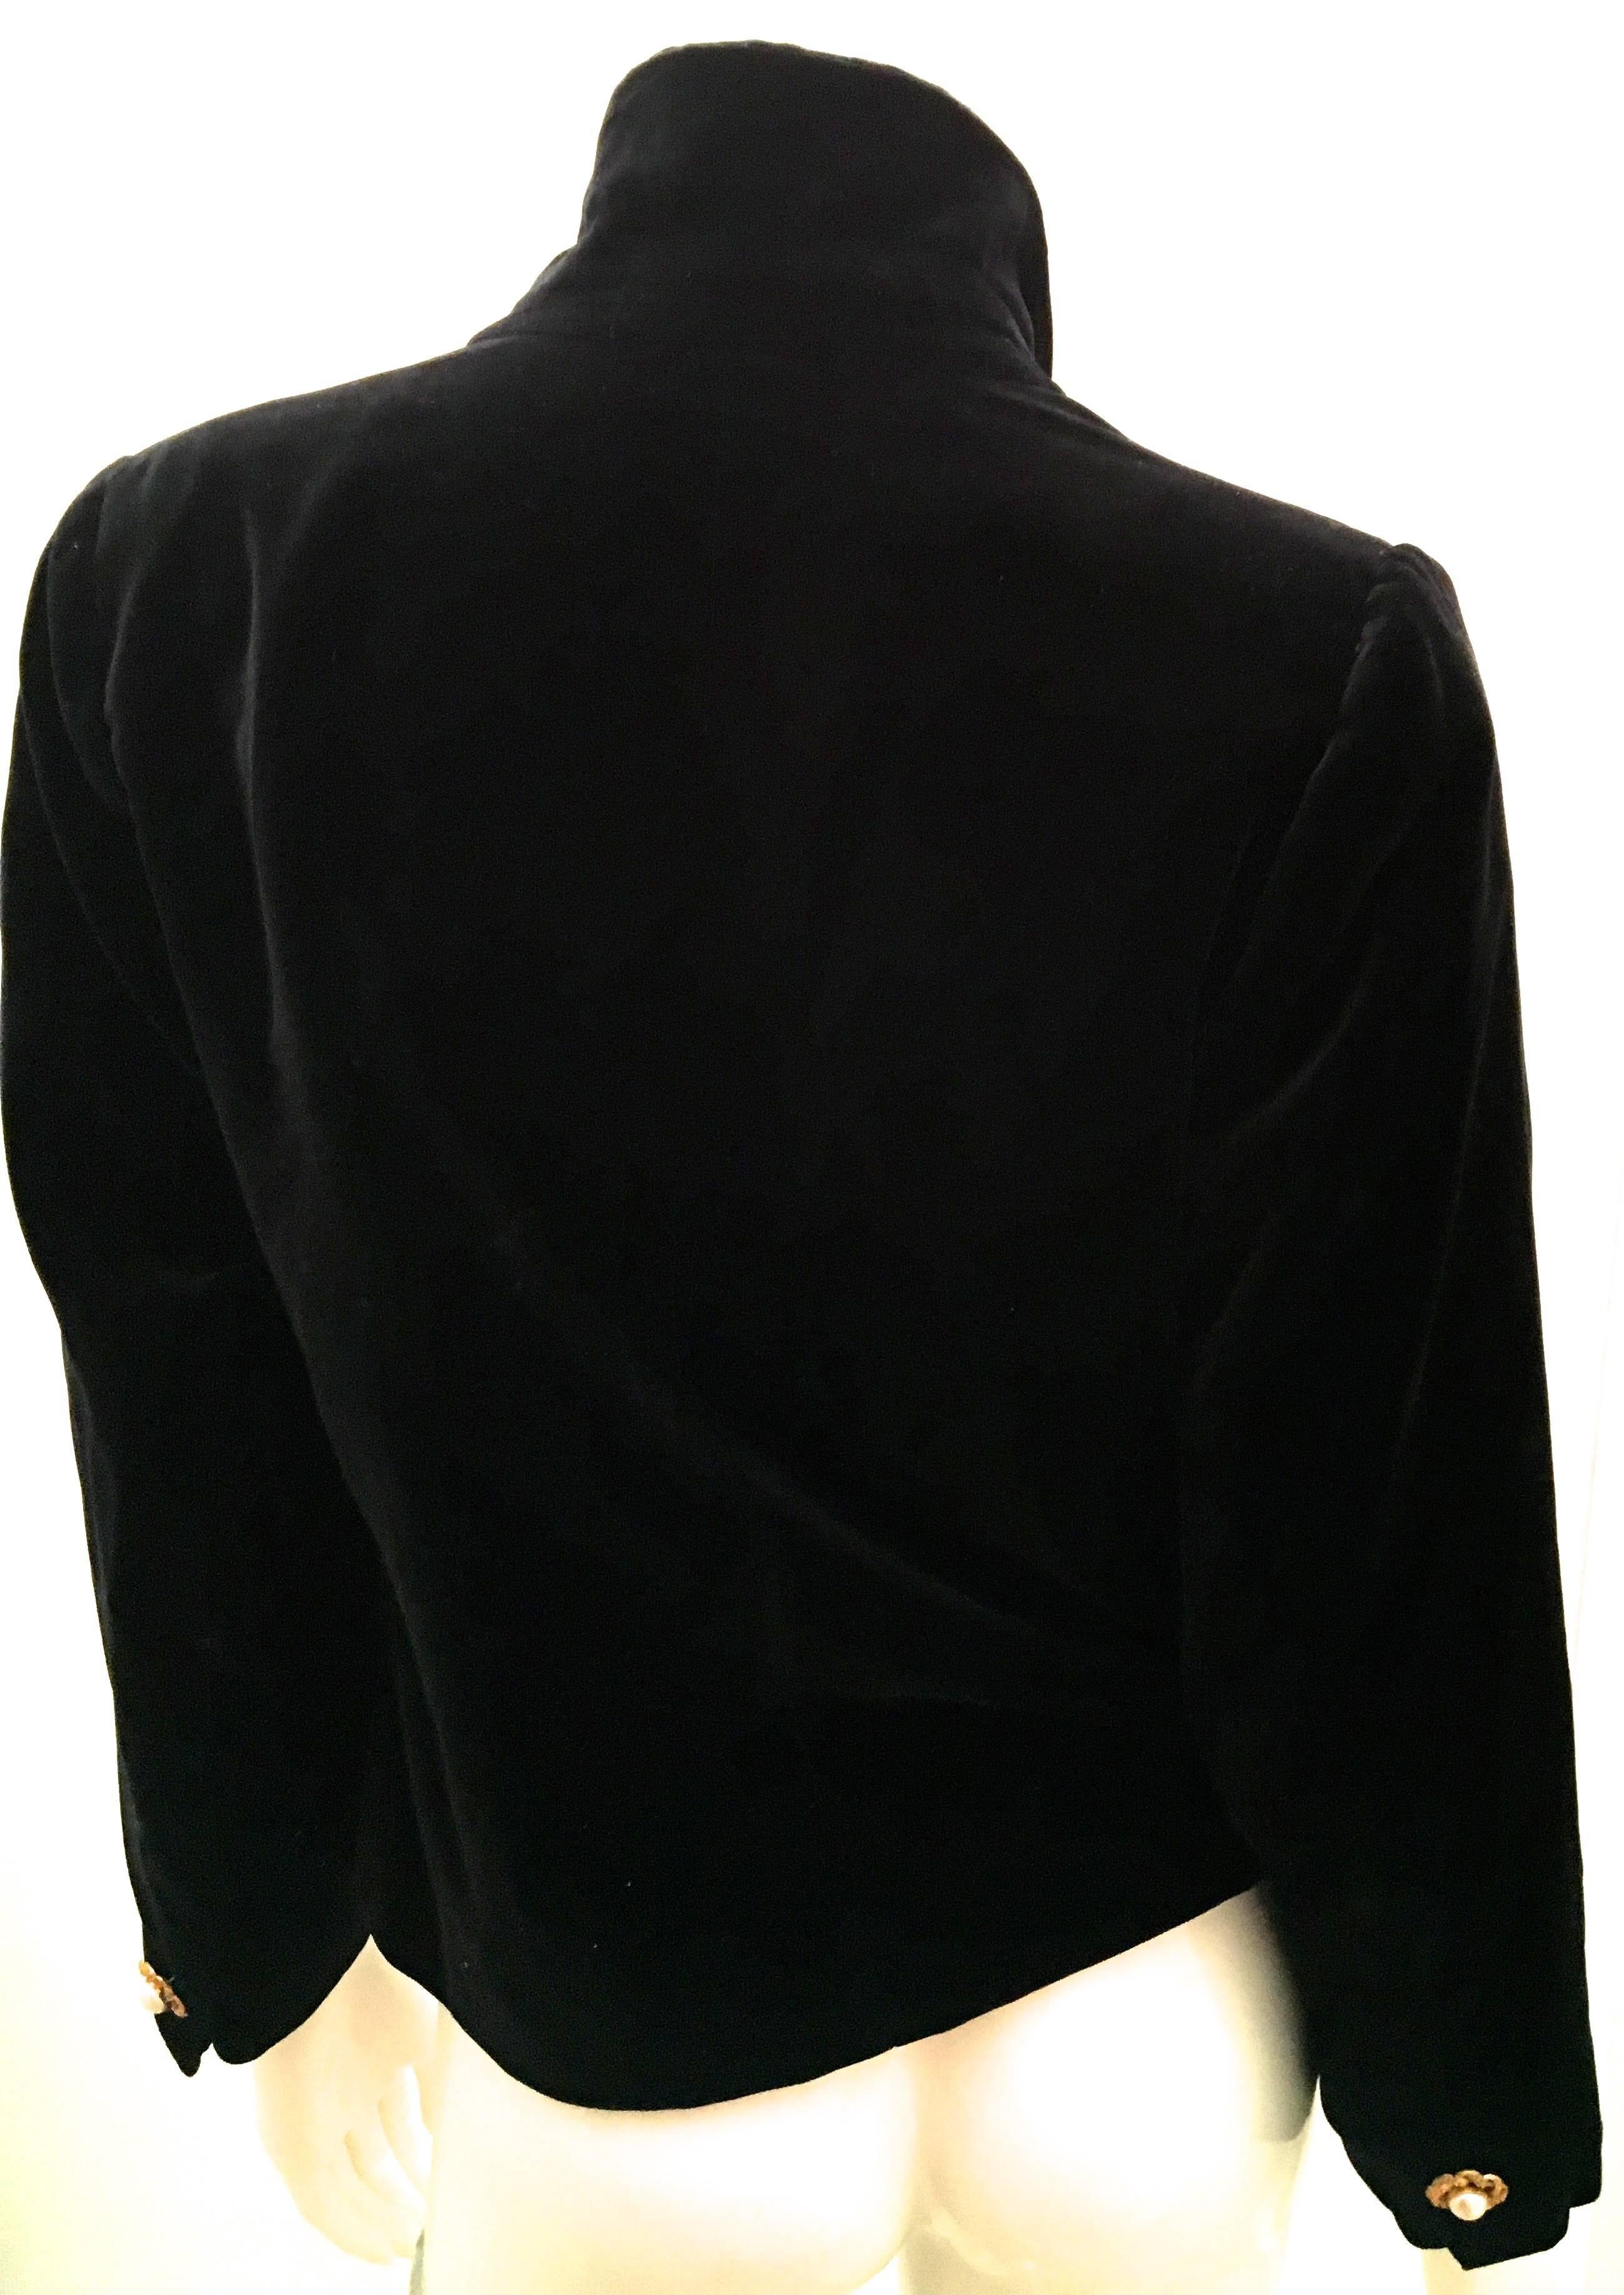 Presented here is a beautiful black blazer from the Yves Saint Laurent fashion house. The blazer is from the early 1990's. The blazer is a size 36. The blazer is black velvet  on the entire exterior of the blazer and is lined in an acetate and rayon